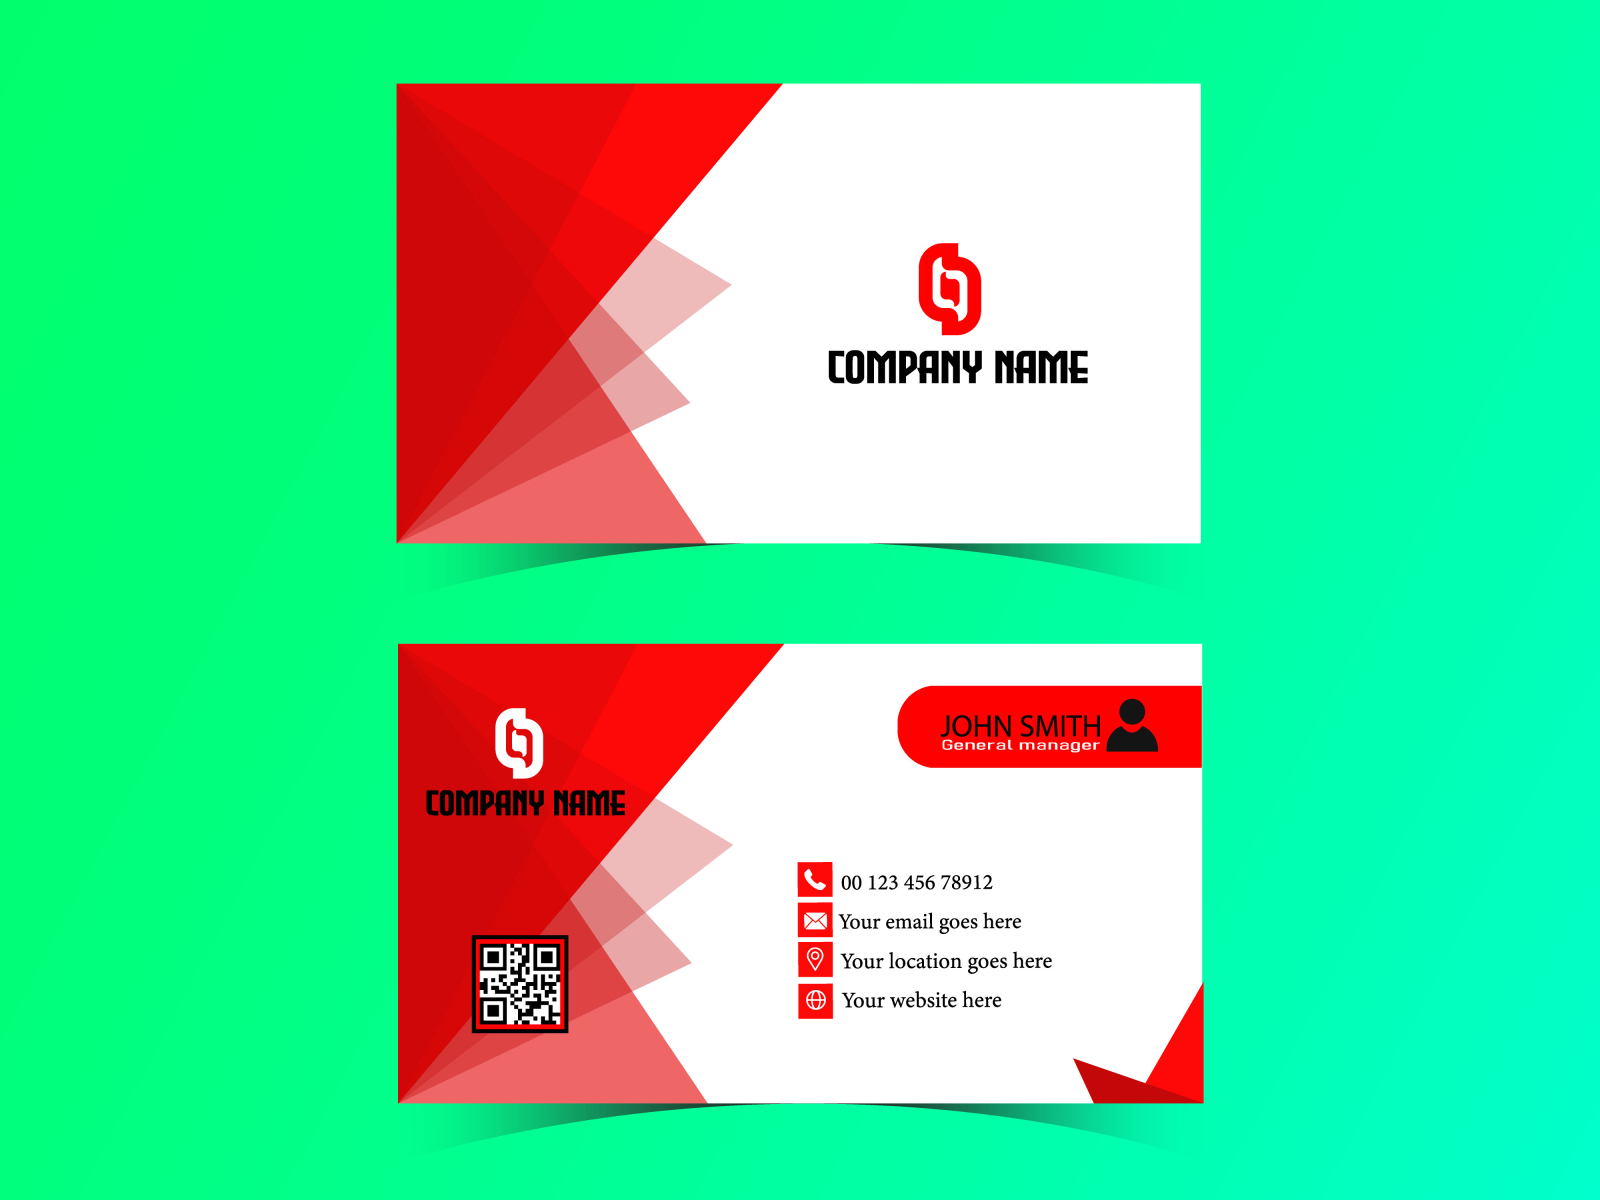 Business Card Design by Graphics Lab on Dribbble